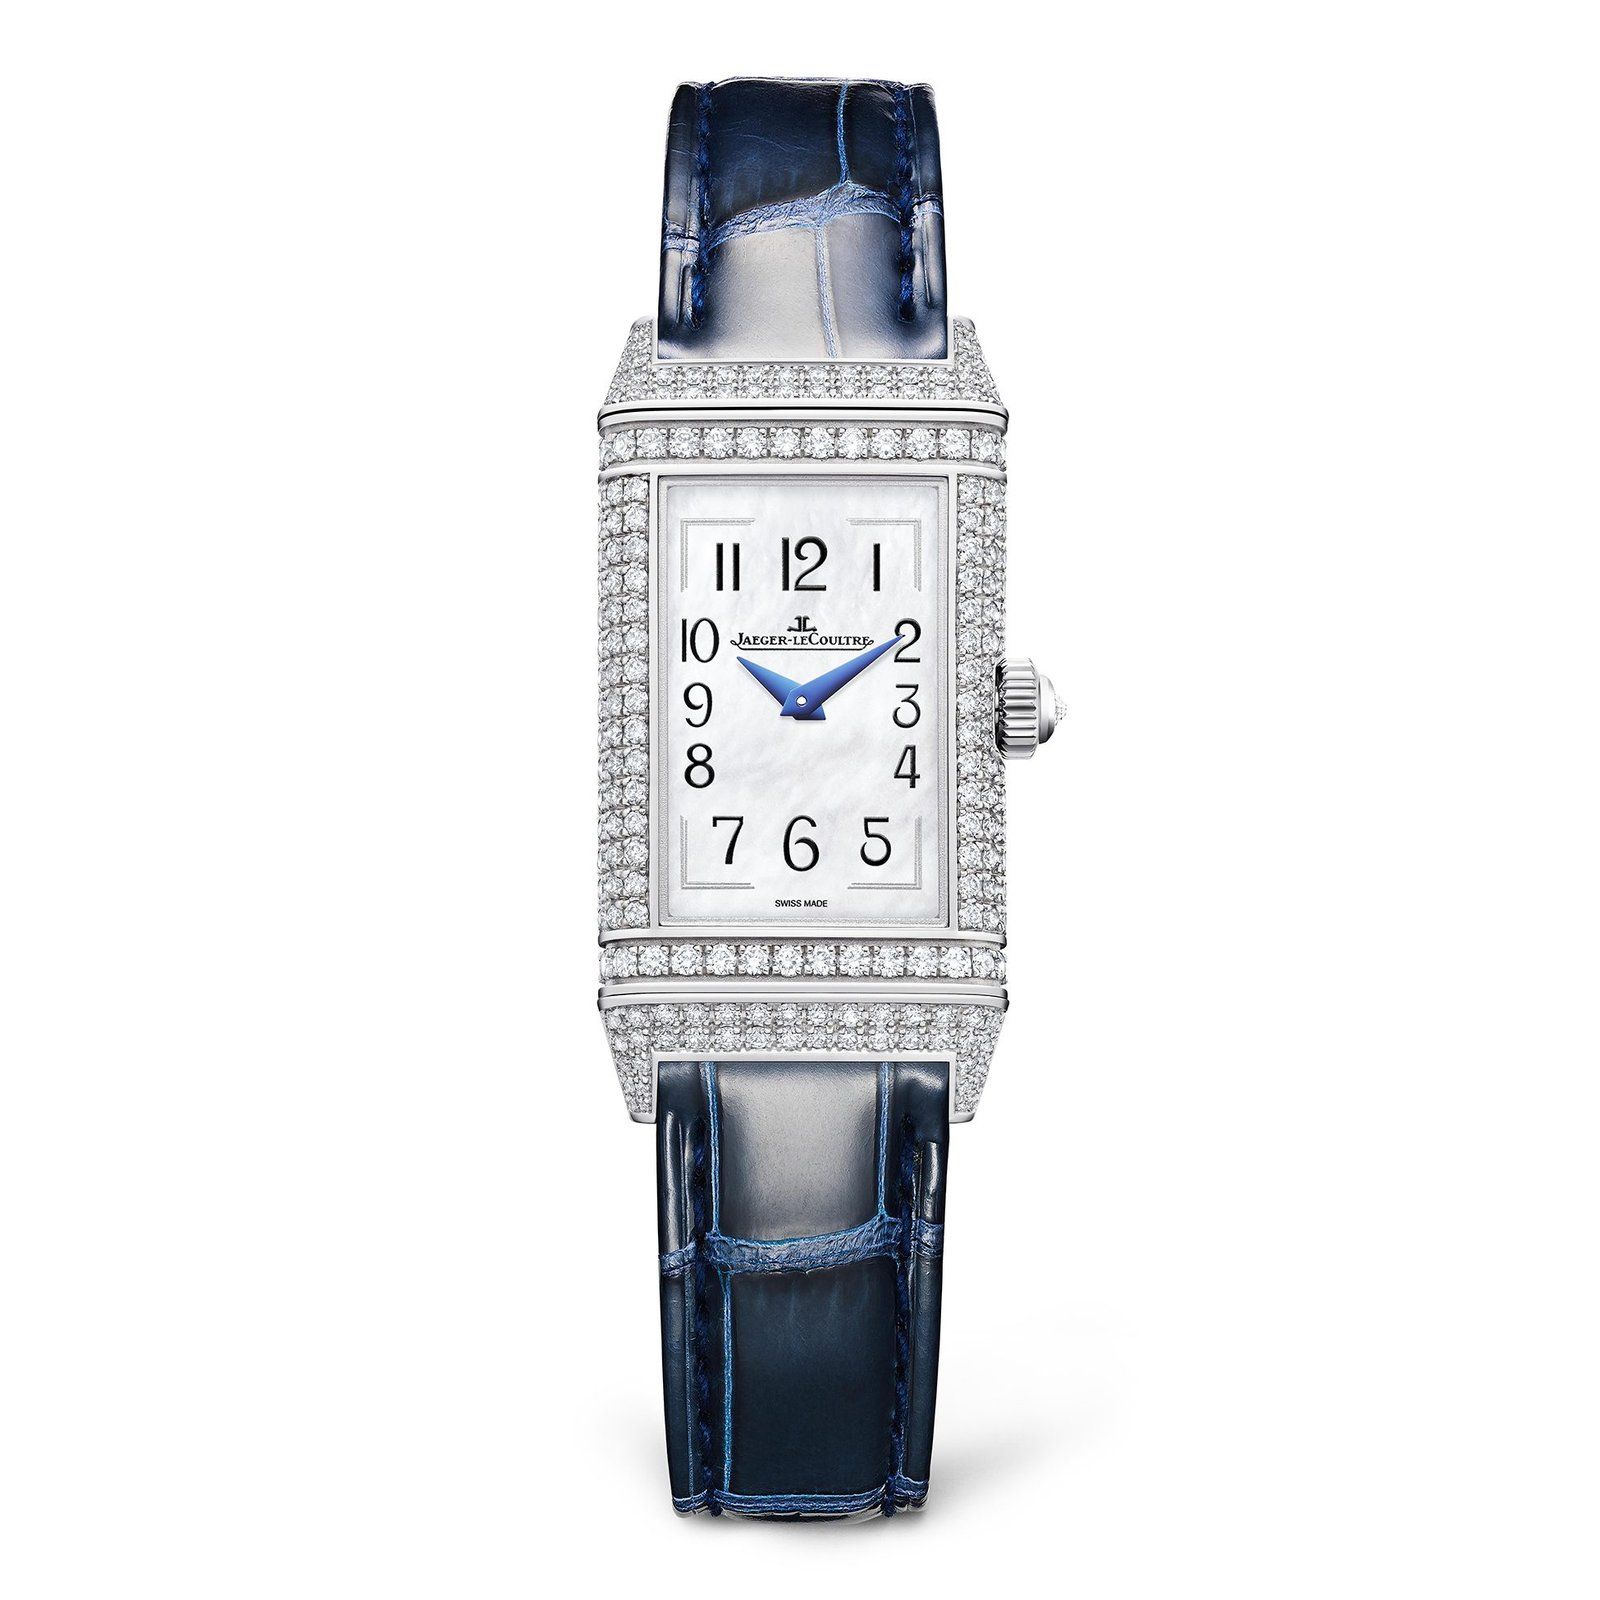 Dial face of the Jaeger Lecoultre Reverso one blue